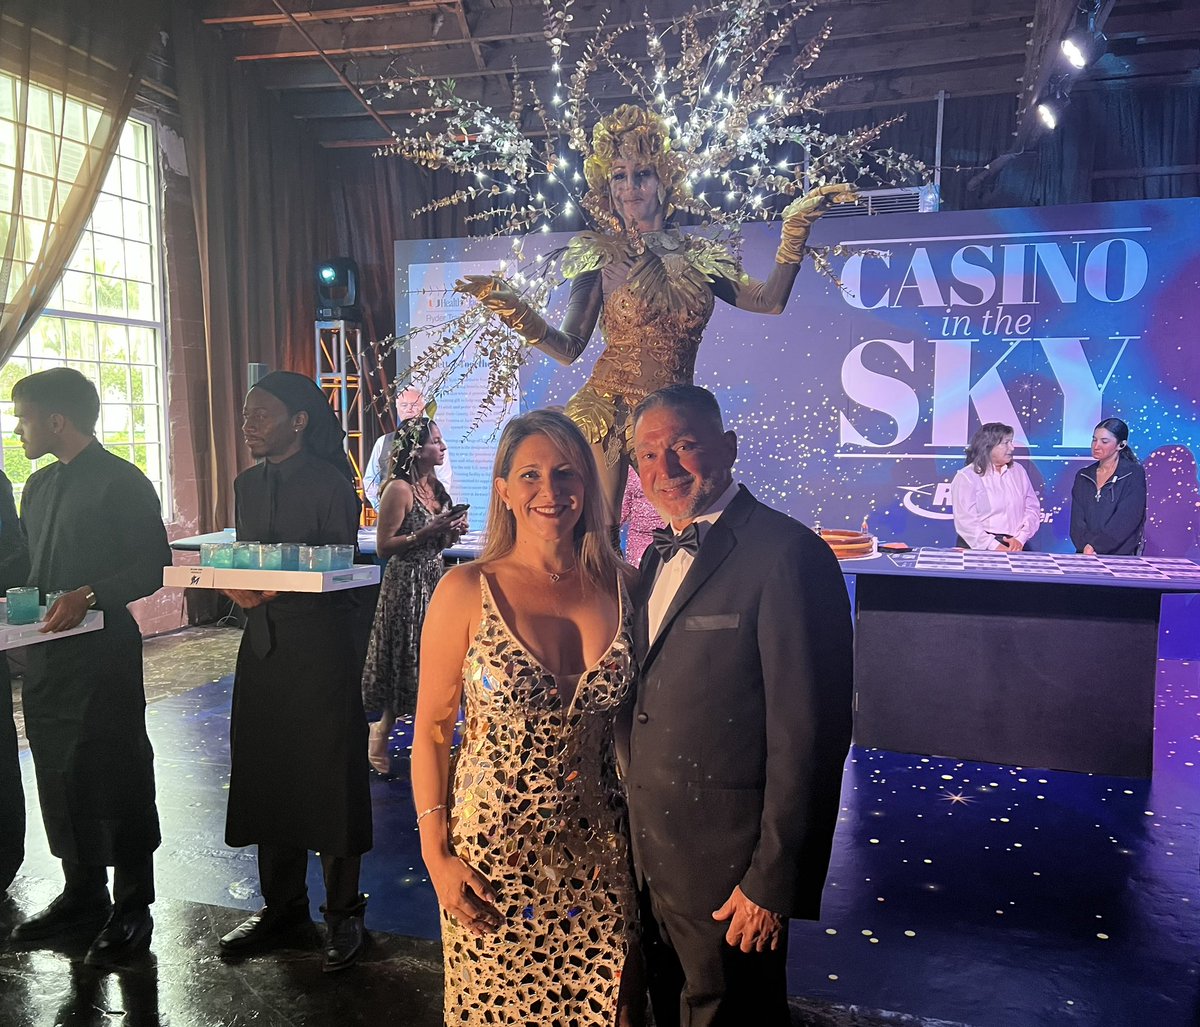 Jackson Health Foundation welcomes our guests to the 2023 Golden Angels Gala, commemorating the 30th Anniversary of Ryder Trauma Center at Jackson Memorial Hospital. #GoldenAngelsGala #MakingMiraclesHappen #SupportJacksonHealthFoundation #MiraclesMadeDaily #LightUpJHF